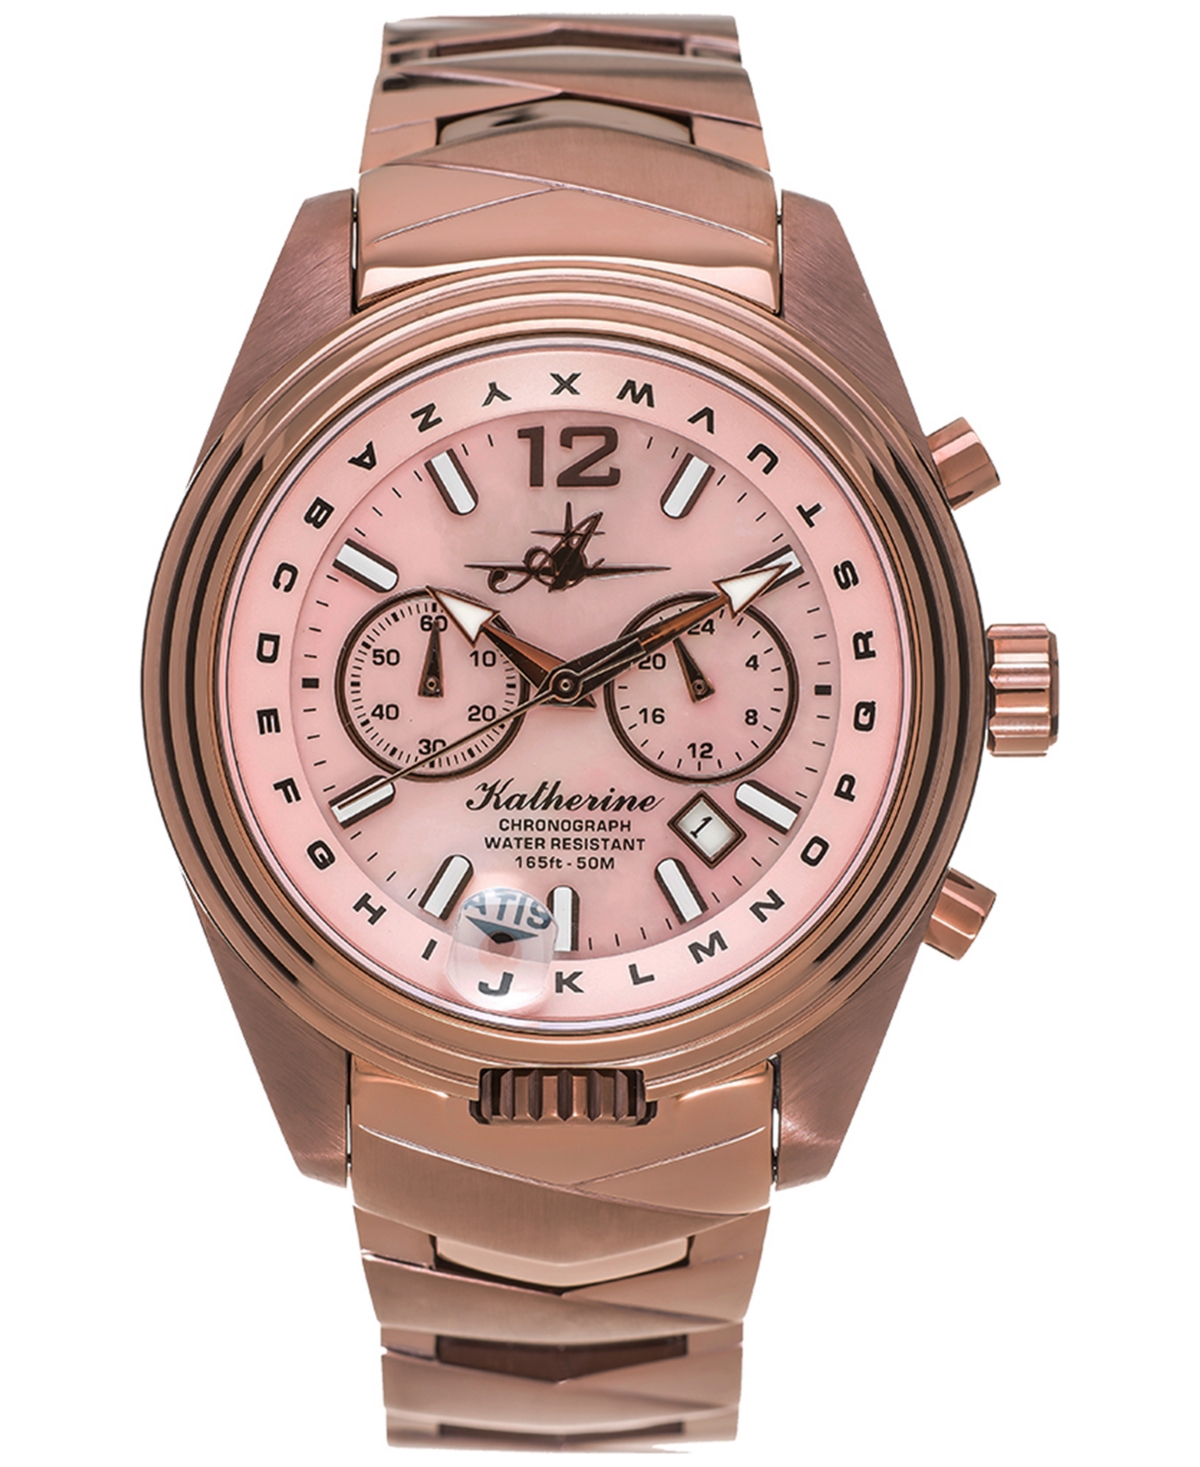 Women's Katherine Chronograph Multifunctional Chocolate Ion-Plated Stainless Steel Bracelet Watch 40mm - Chocolate